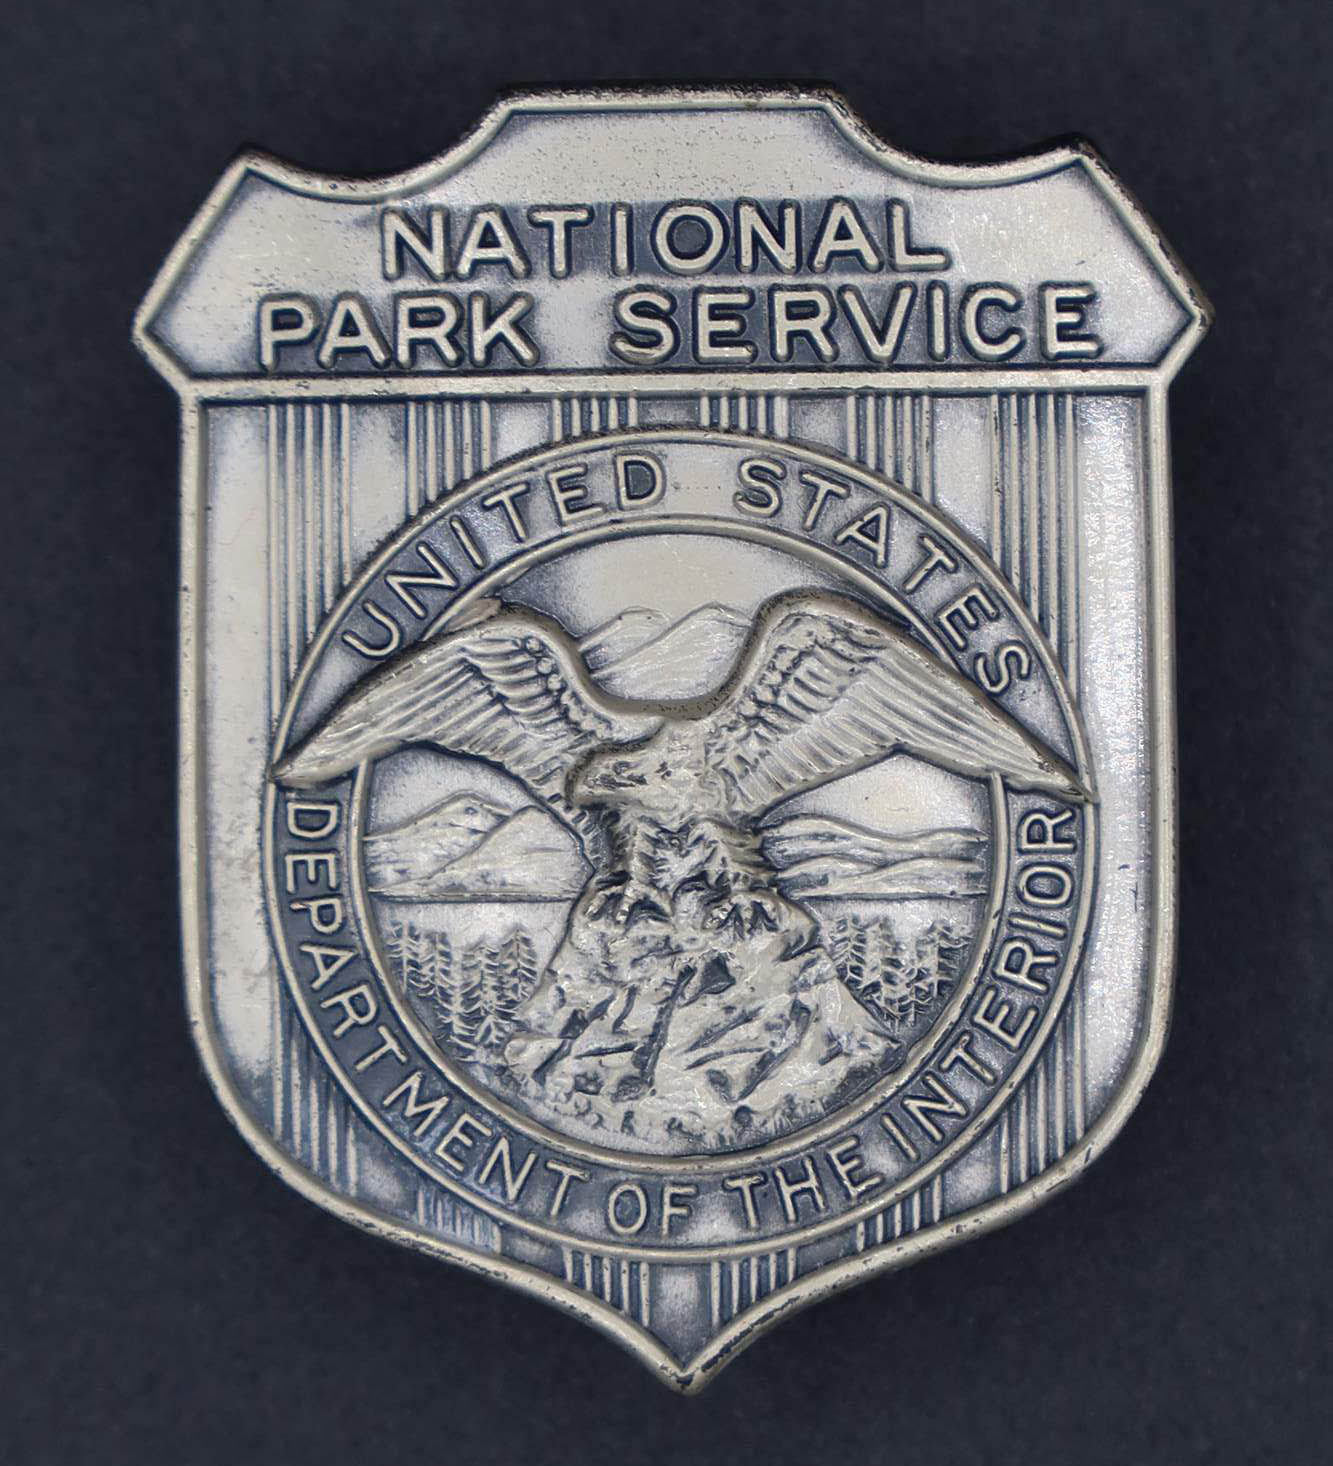 Silver shield-shaped badge marked National Park Service. The round seal in the middle has an eagle looking to its right.